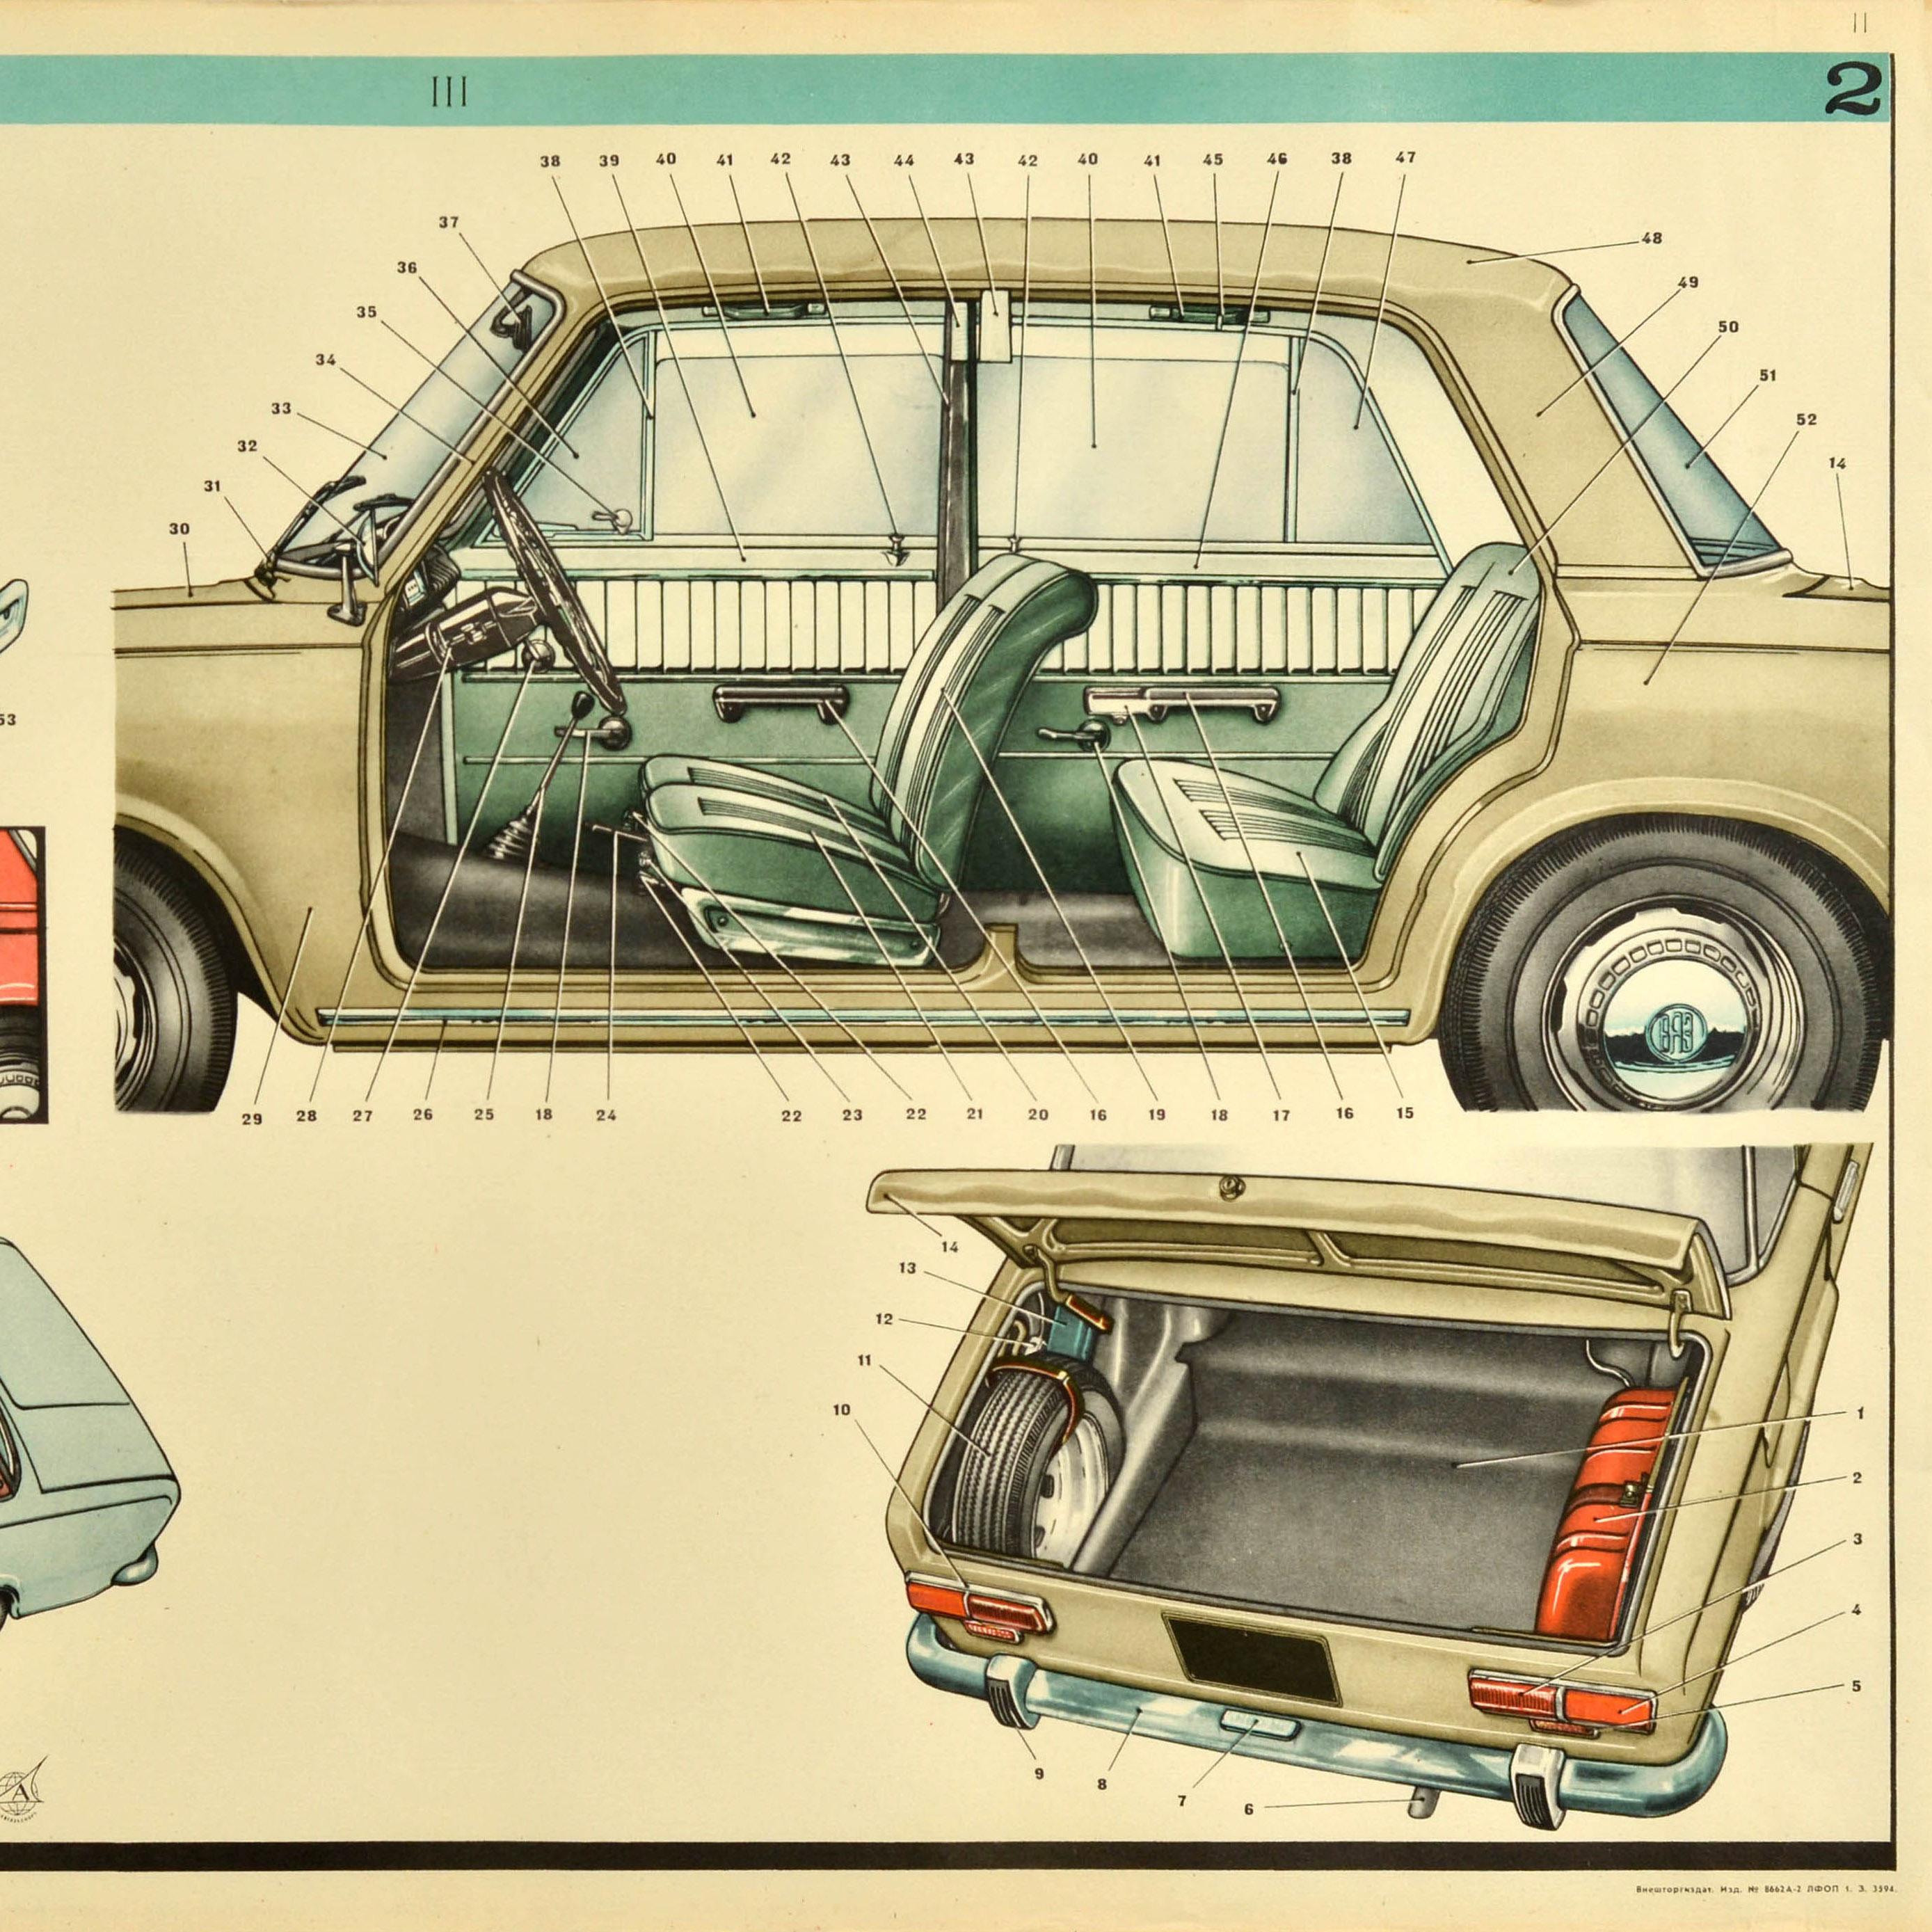 Original vintage car advertising poster for Lada showing the interior of the vehicle with smaller images of the boot and seating detailing the mechanisms and seat belts, the text below - v/o Avtoexport SSSR Moskva / Autoexport USSR Moscow.